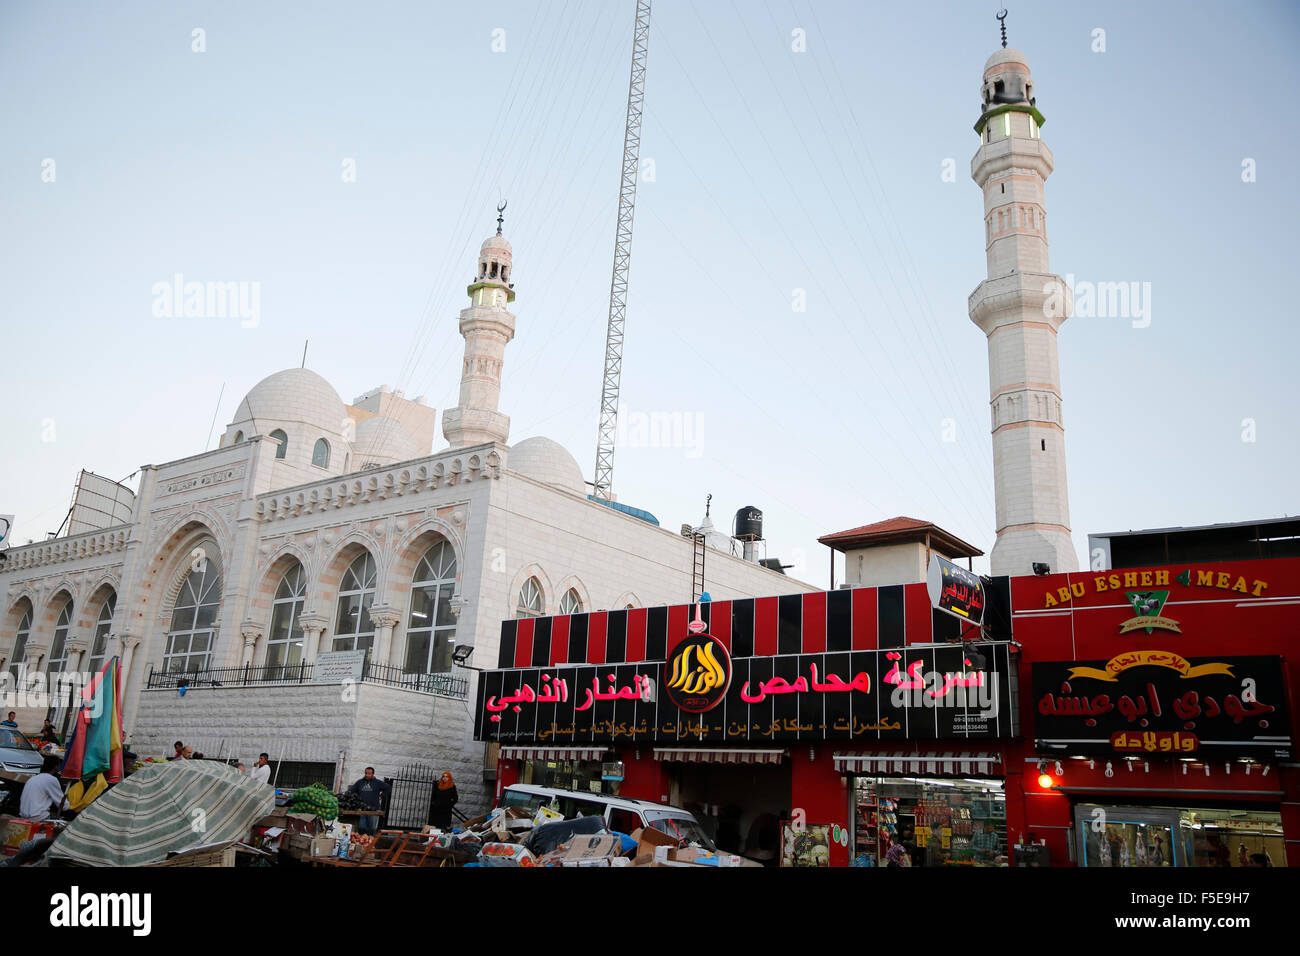 Ramallah central mosque and market, Palestinian Territories, Middle East Stock Photo